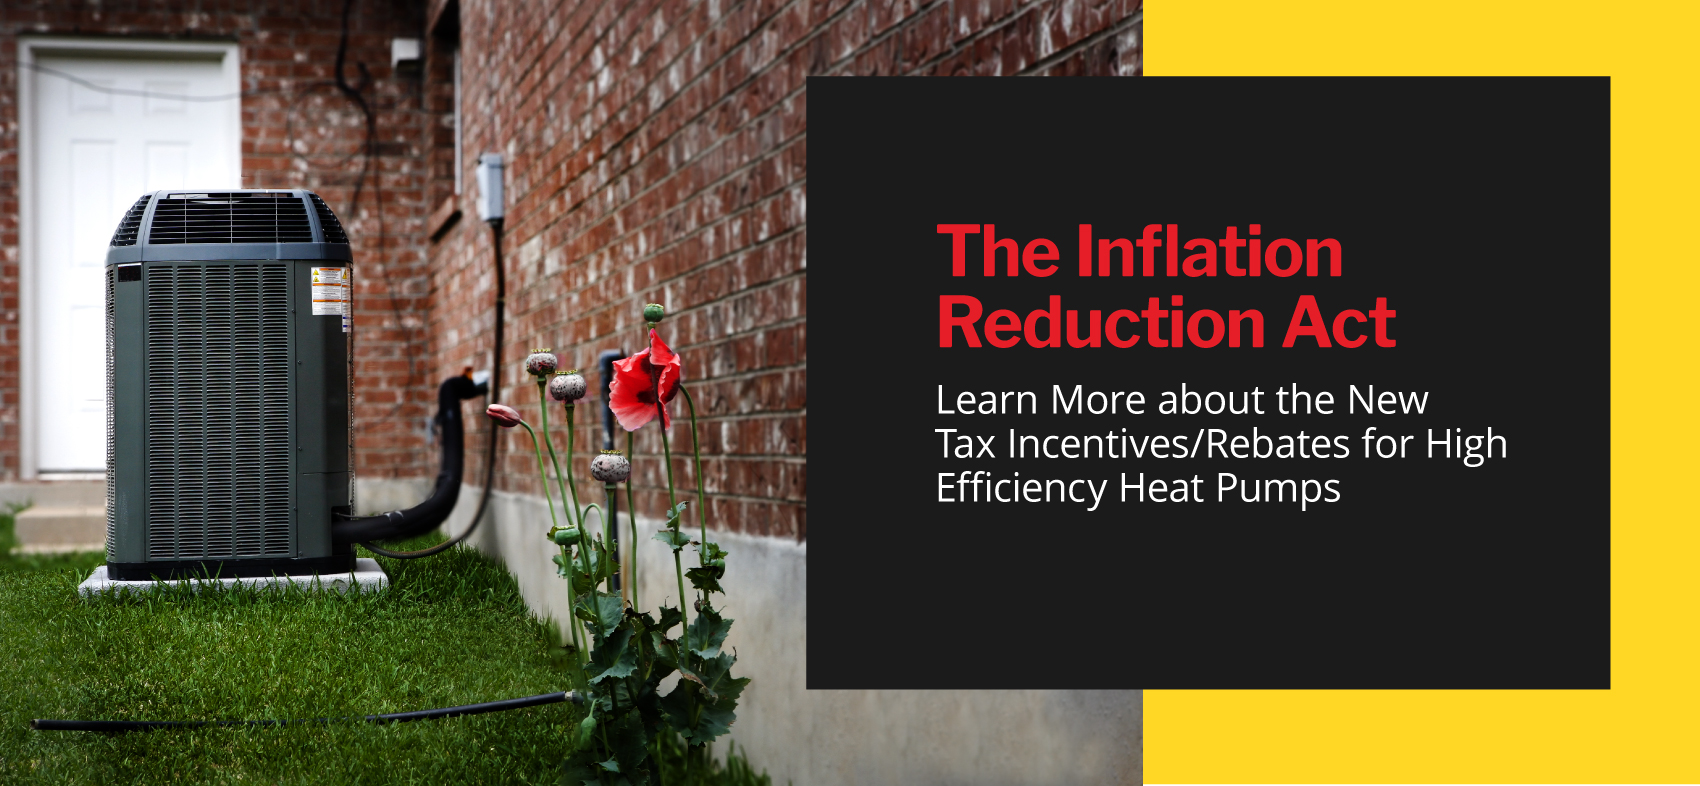 the-inflation-reduction-act-and-the-new-tax-incentives-rebates-for-high-efficiency-heat-pumps